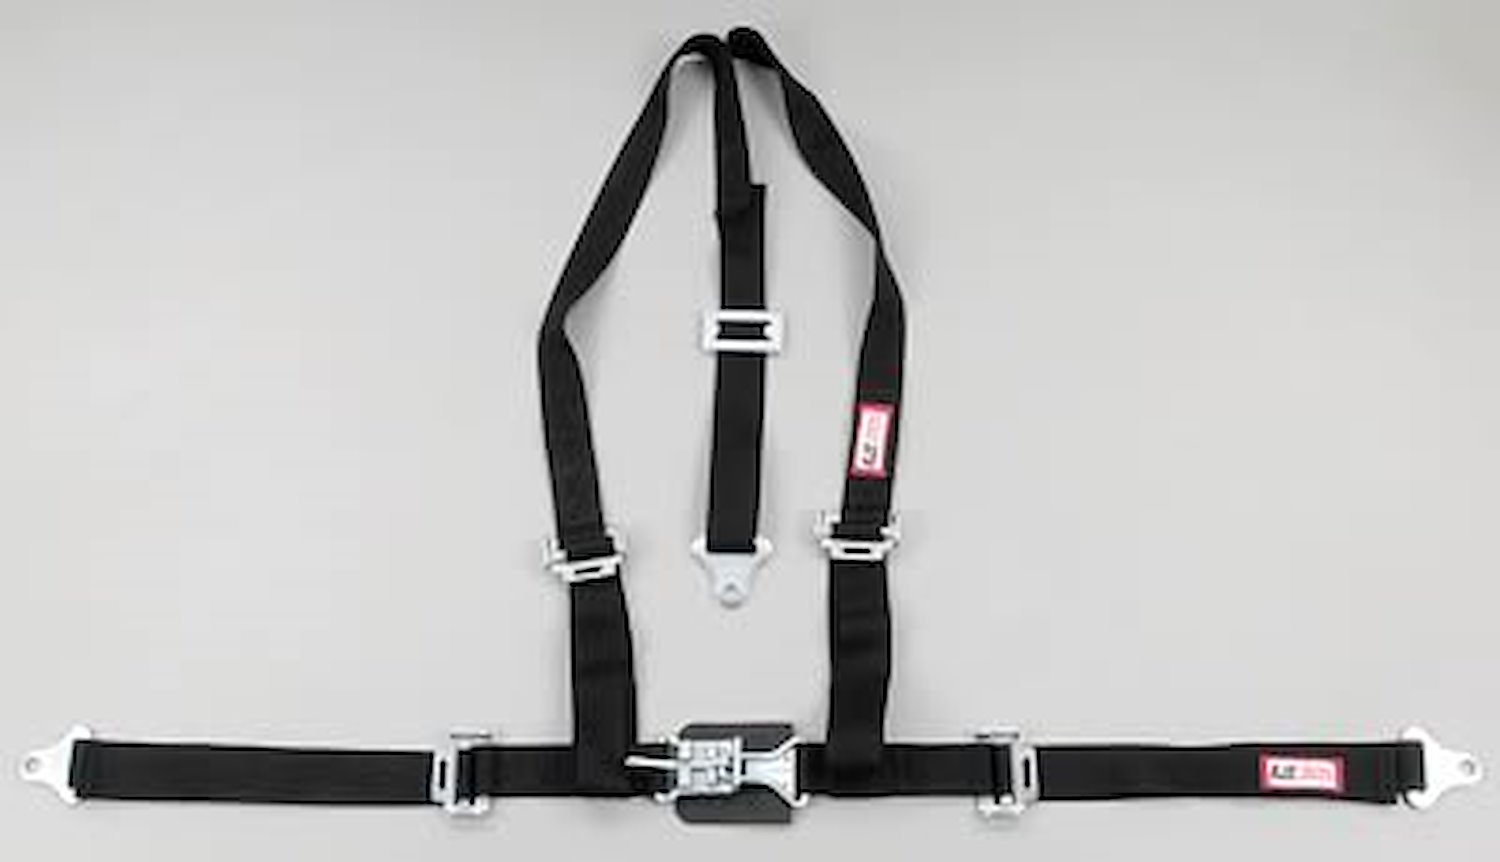 NON-SFI L&L HARNESS 3 PULL DOWN Lap Belt SNAP SEWN IN 2 S.H. Individual FLOOR Mount WRAP/SNAP YELLOW